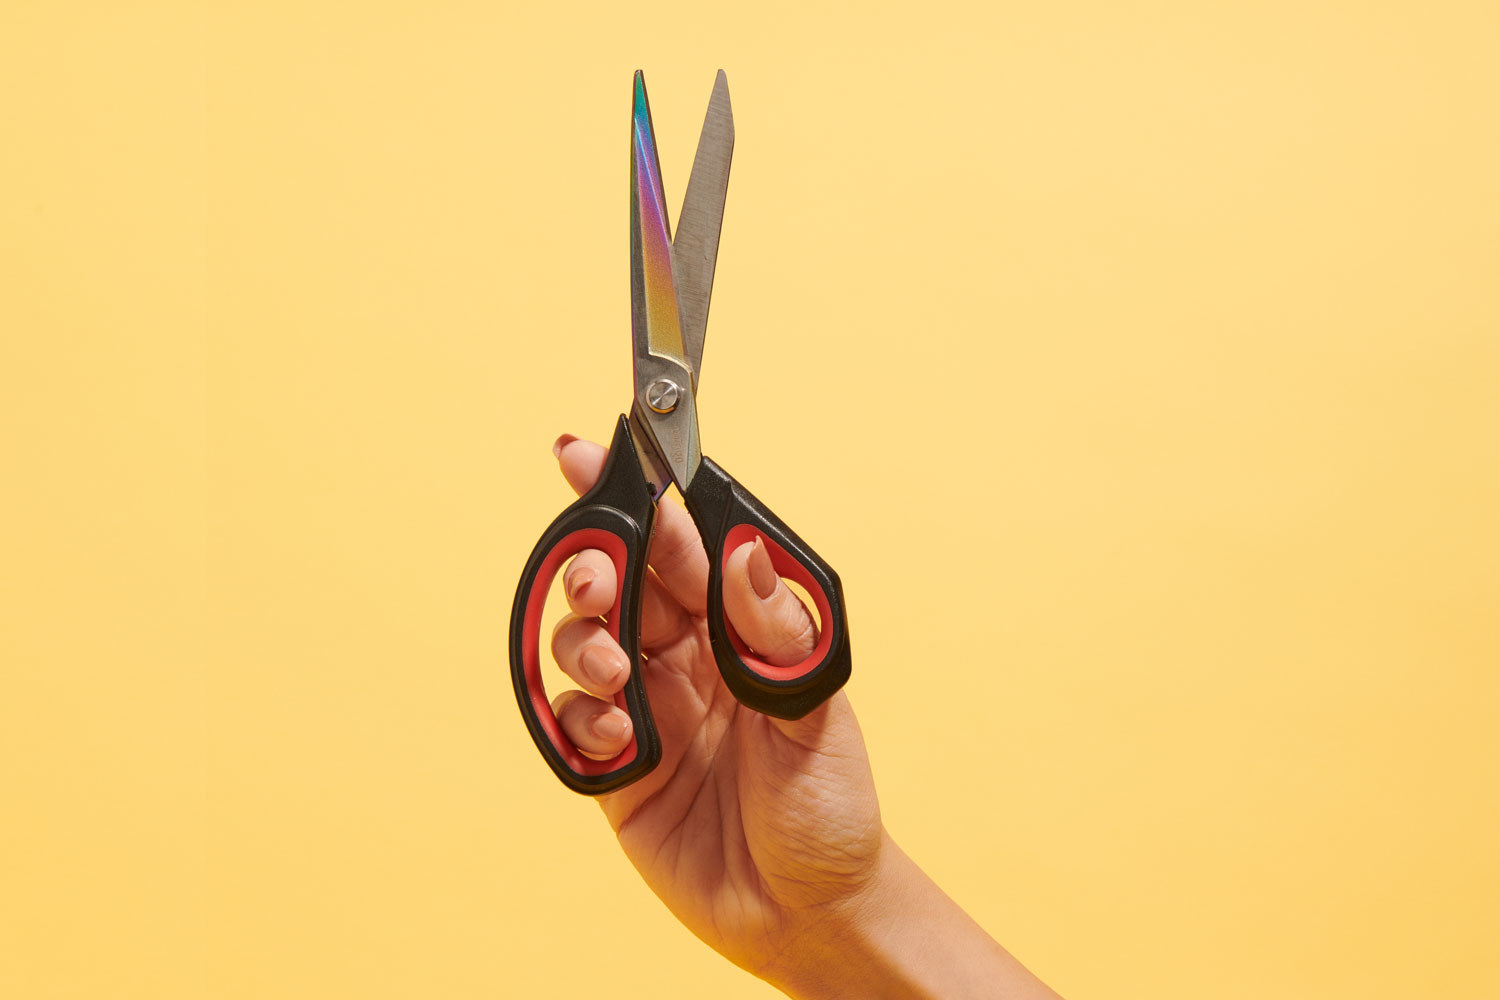 The Best Scissors For Any Budget